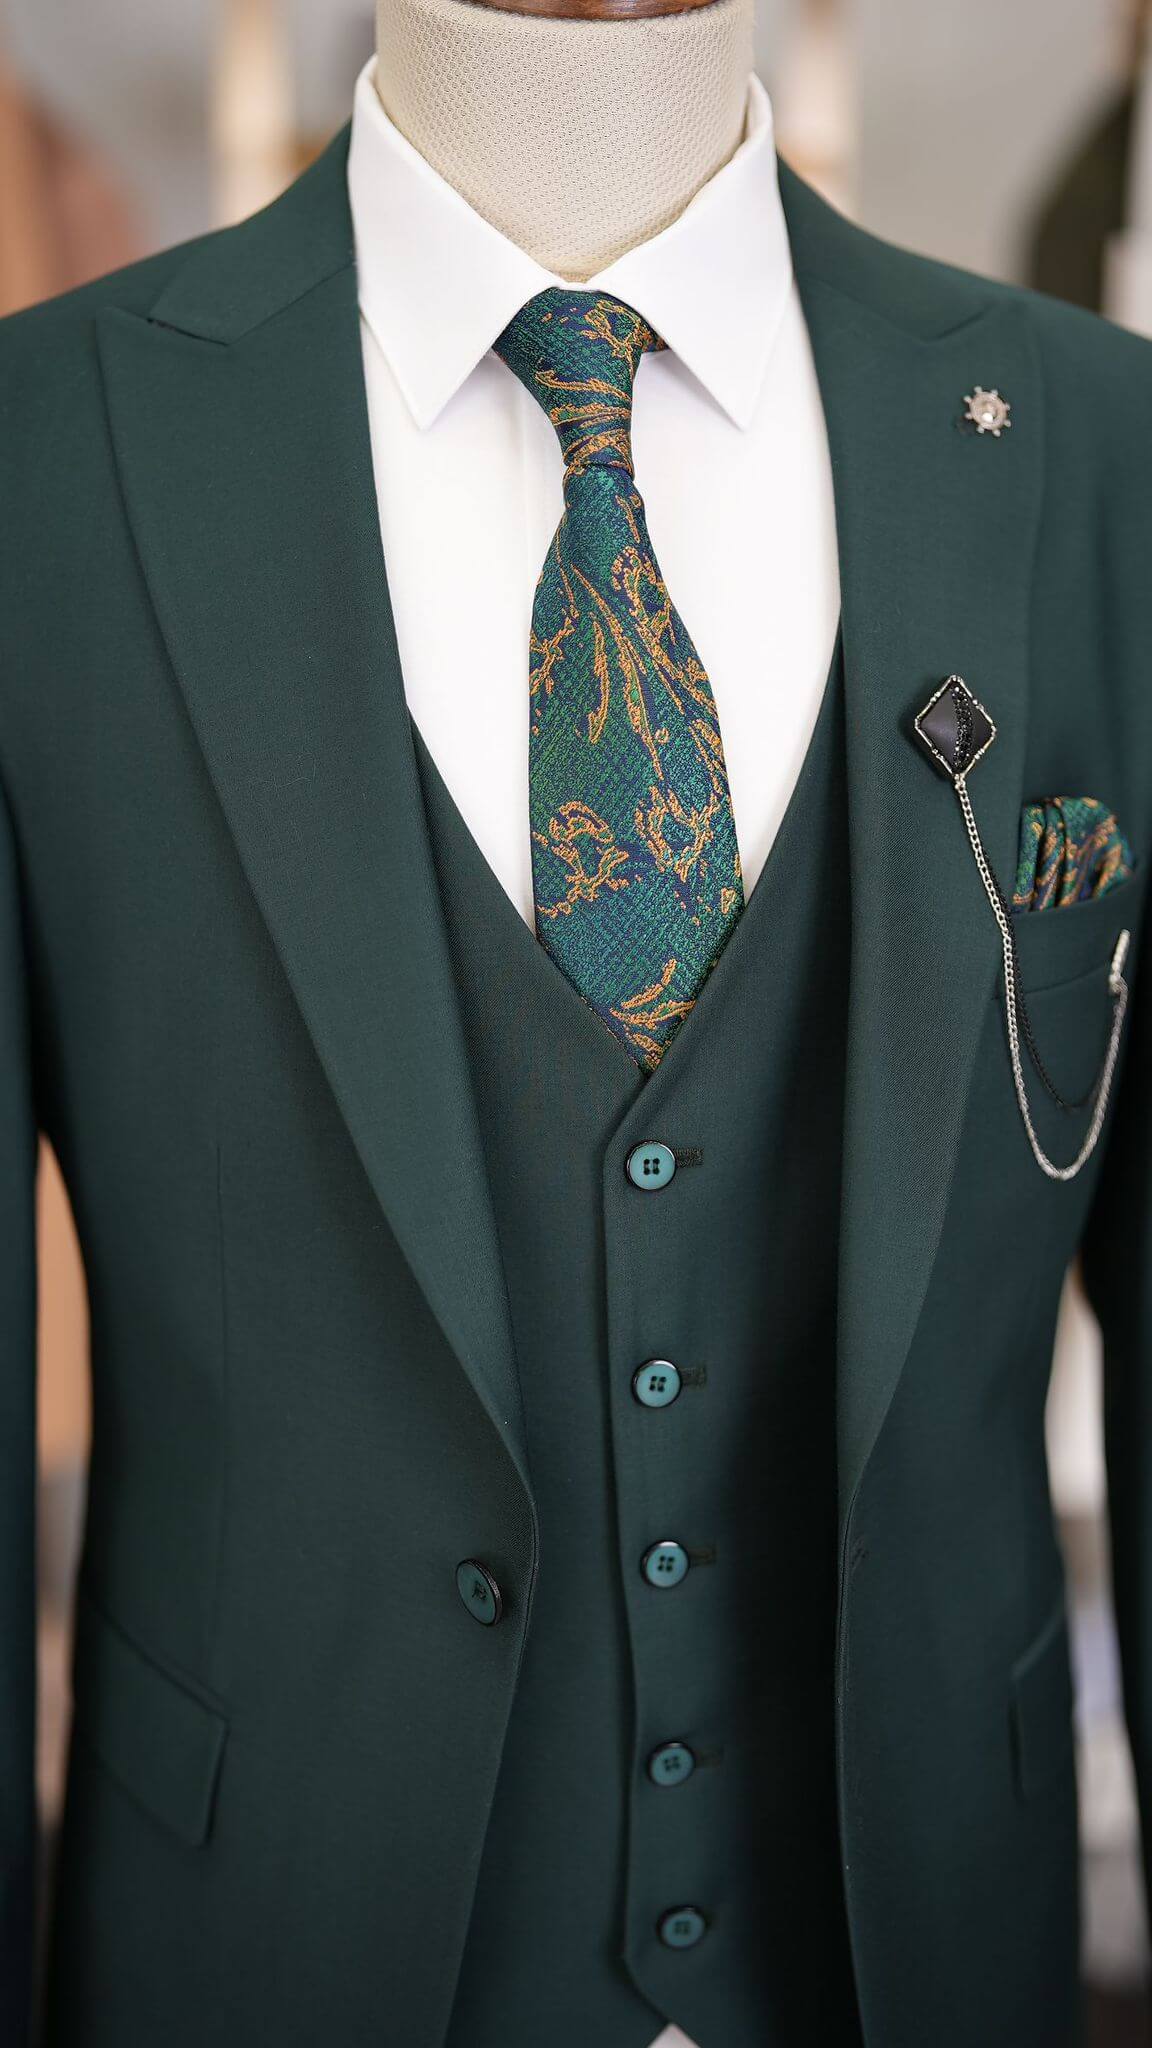 A Green Suit on display.